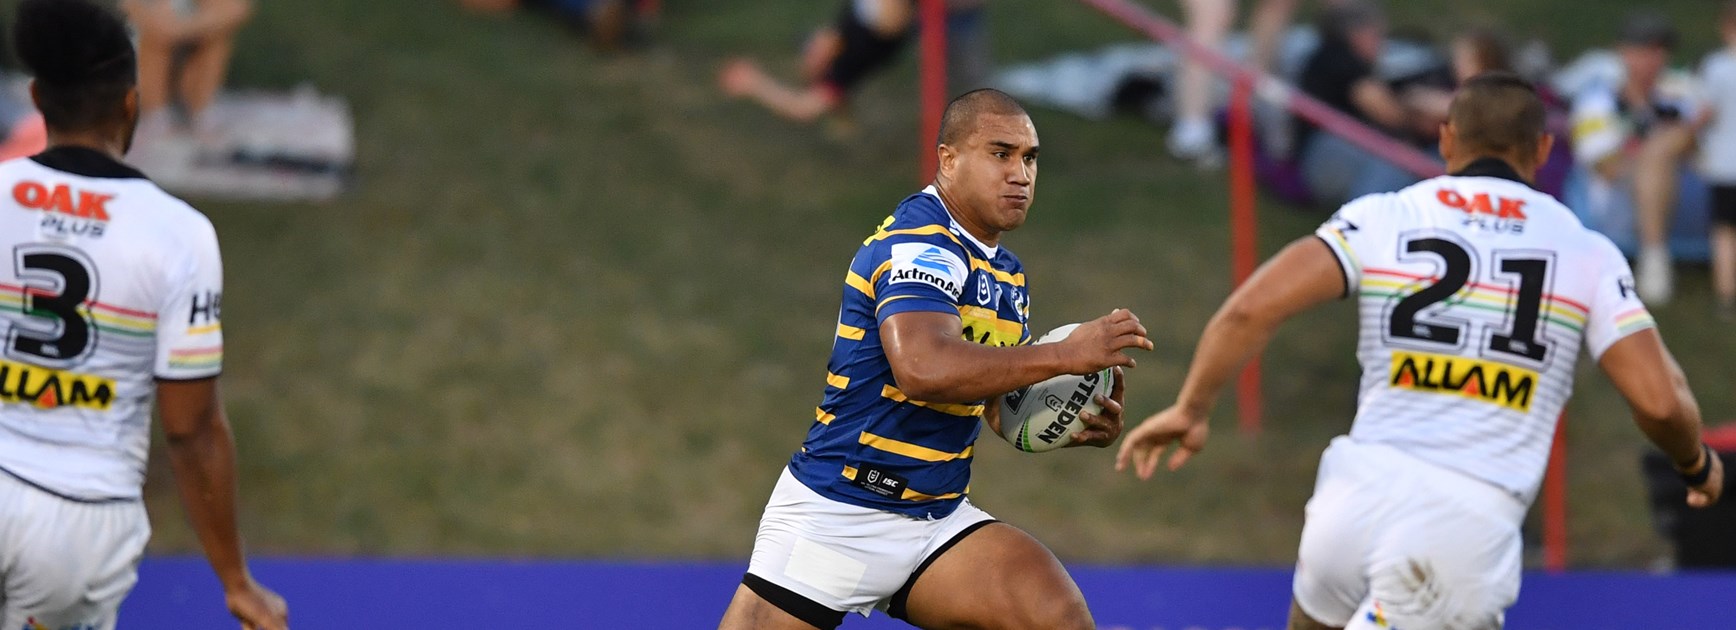 Terepo stood down by Parramatta over alcohol-related incident